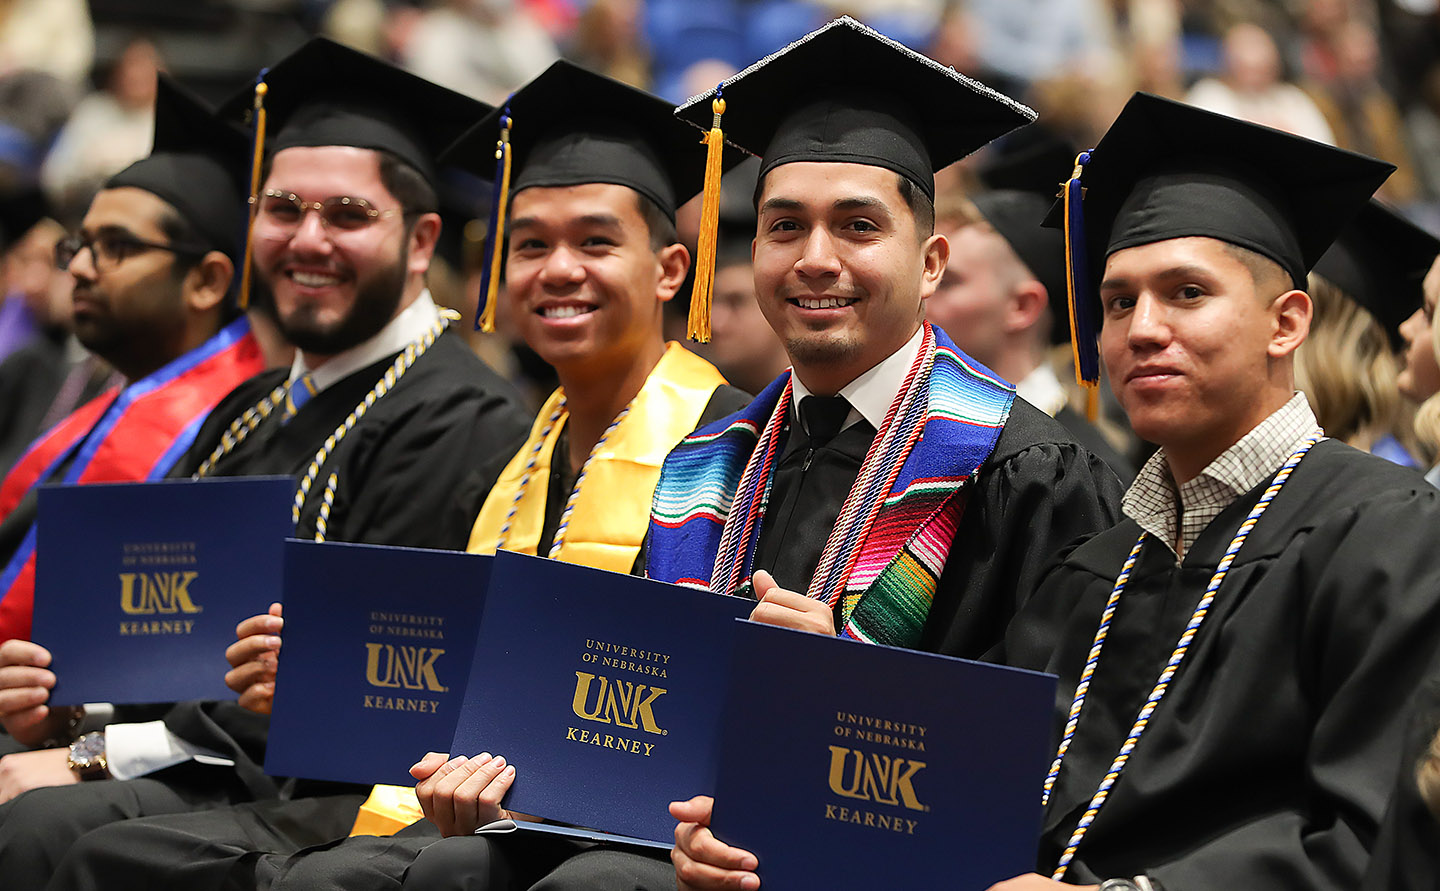 New actions make a University of Nebraska education even more accessible – UNK News